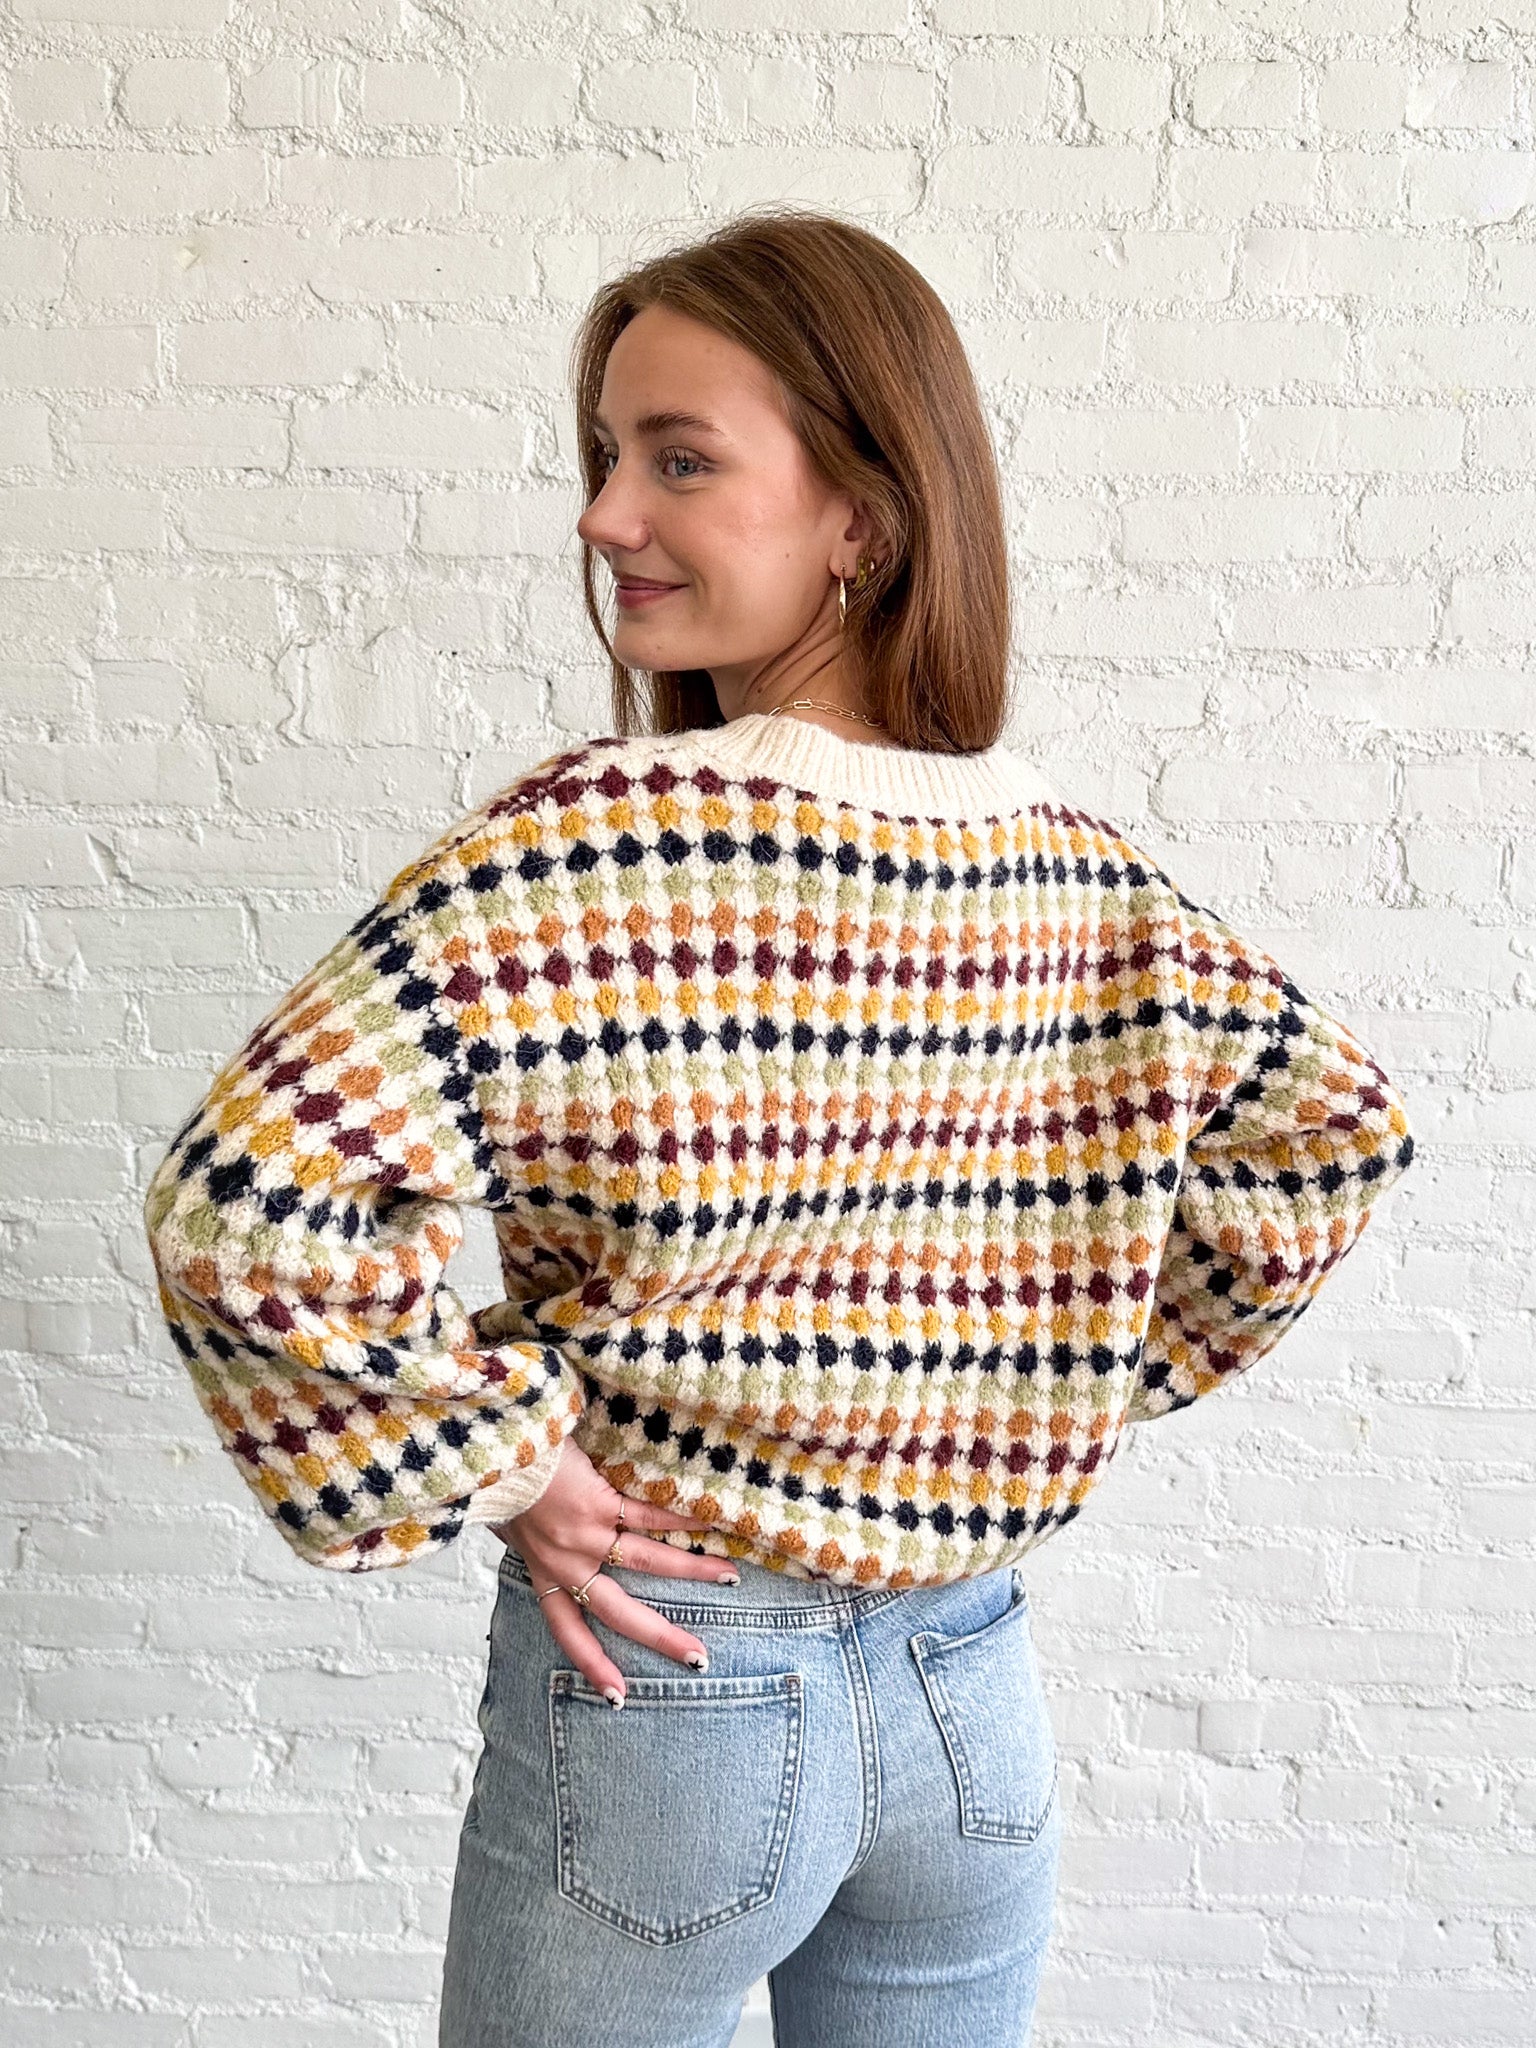 Looking At The Brilliant Sun Sweater